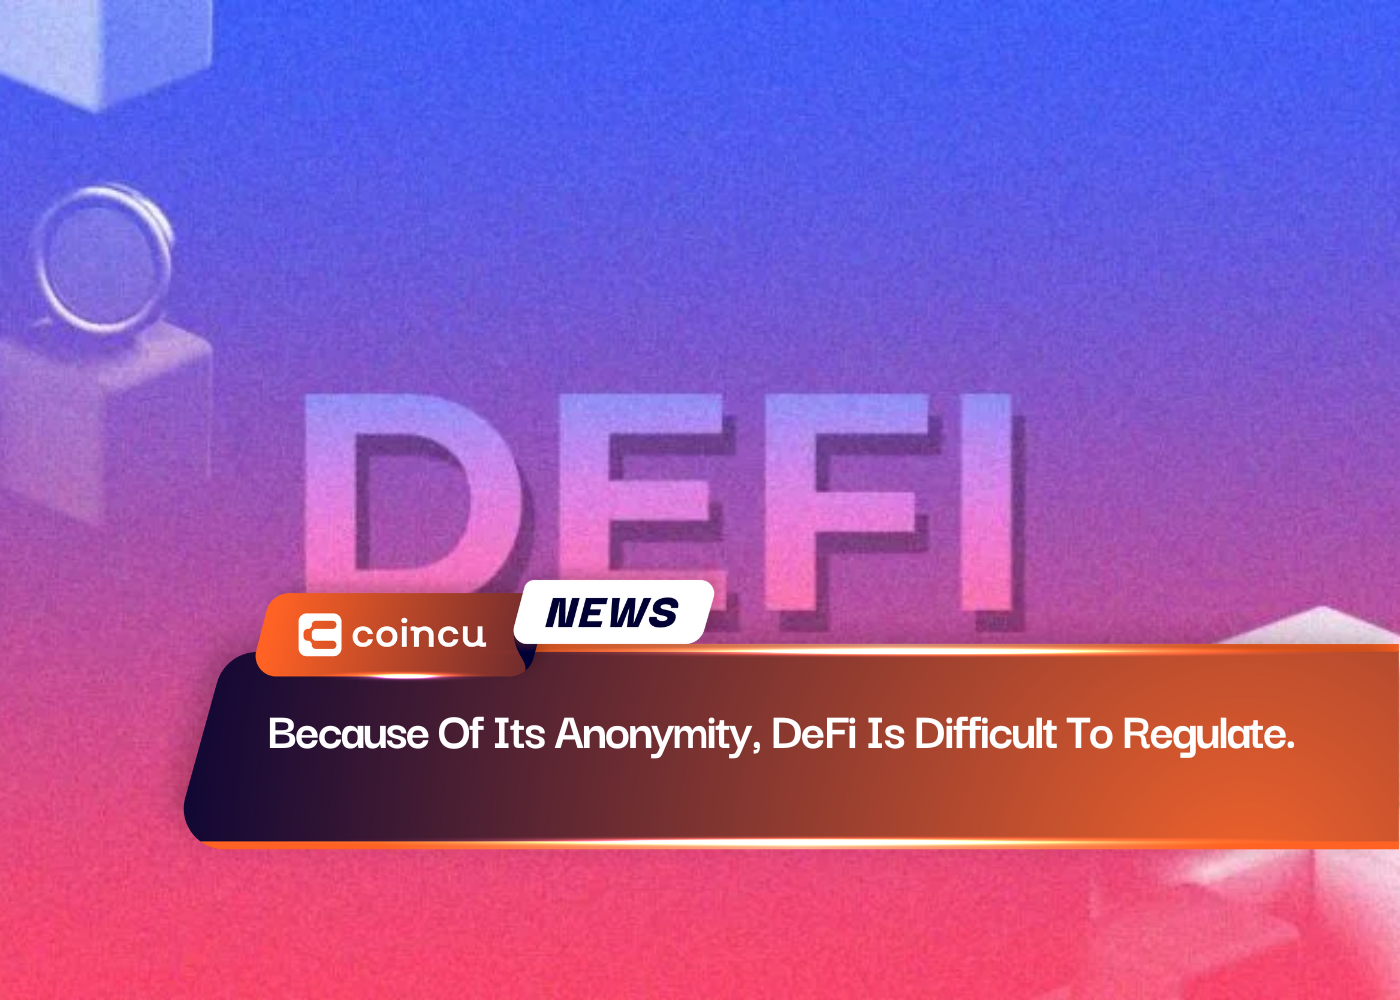 Because Of Its Anonymity, DeFi Is Difficult To Regulate.